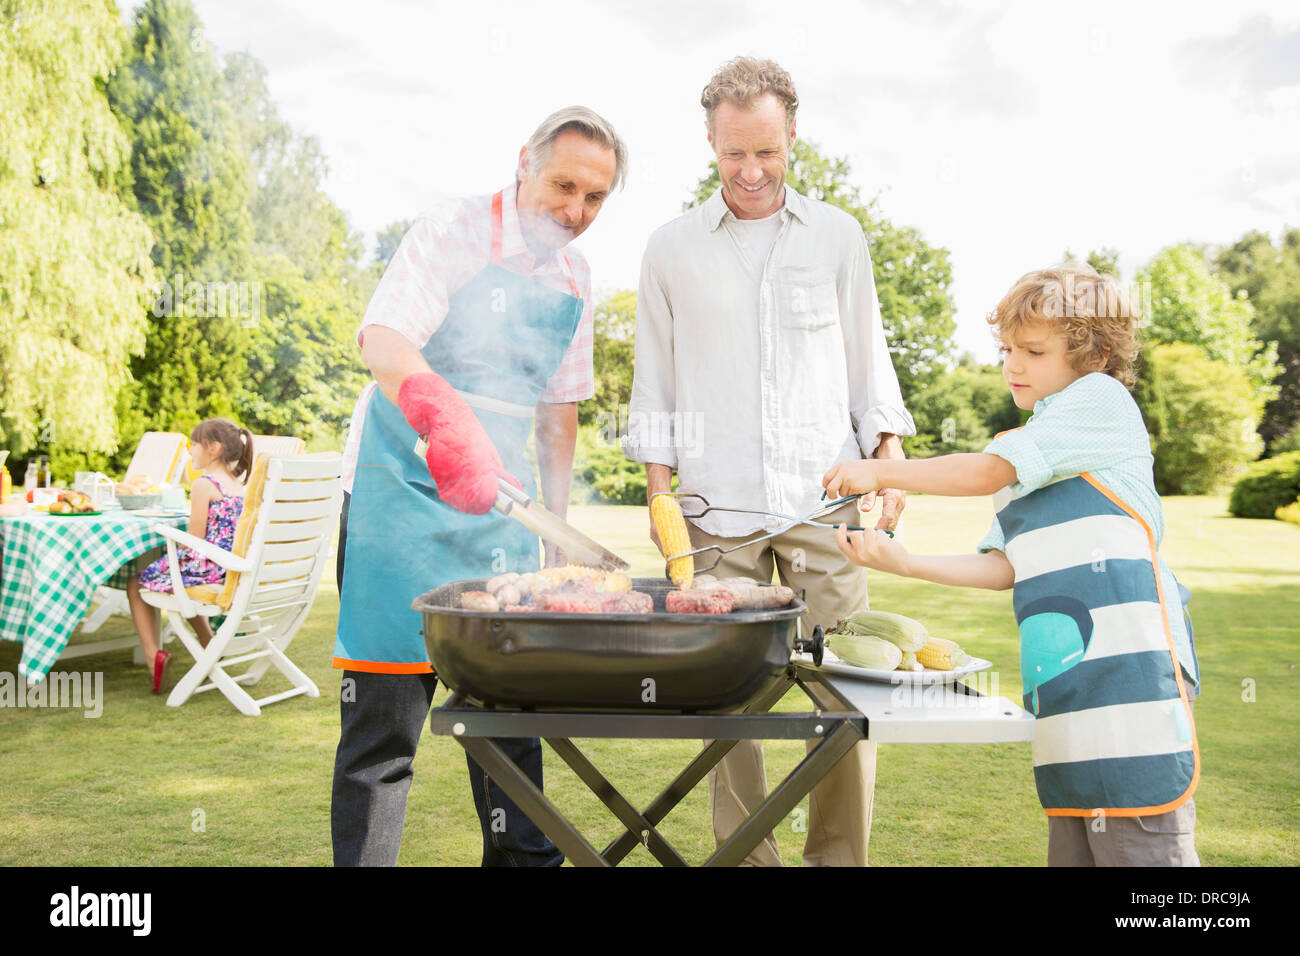 Men grilling meat on barbecue in backyard Stock Photo